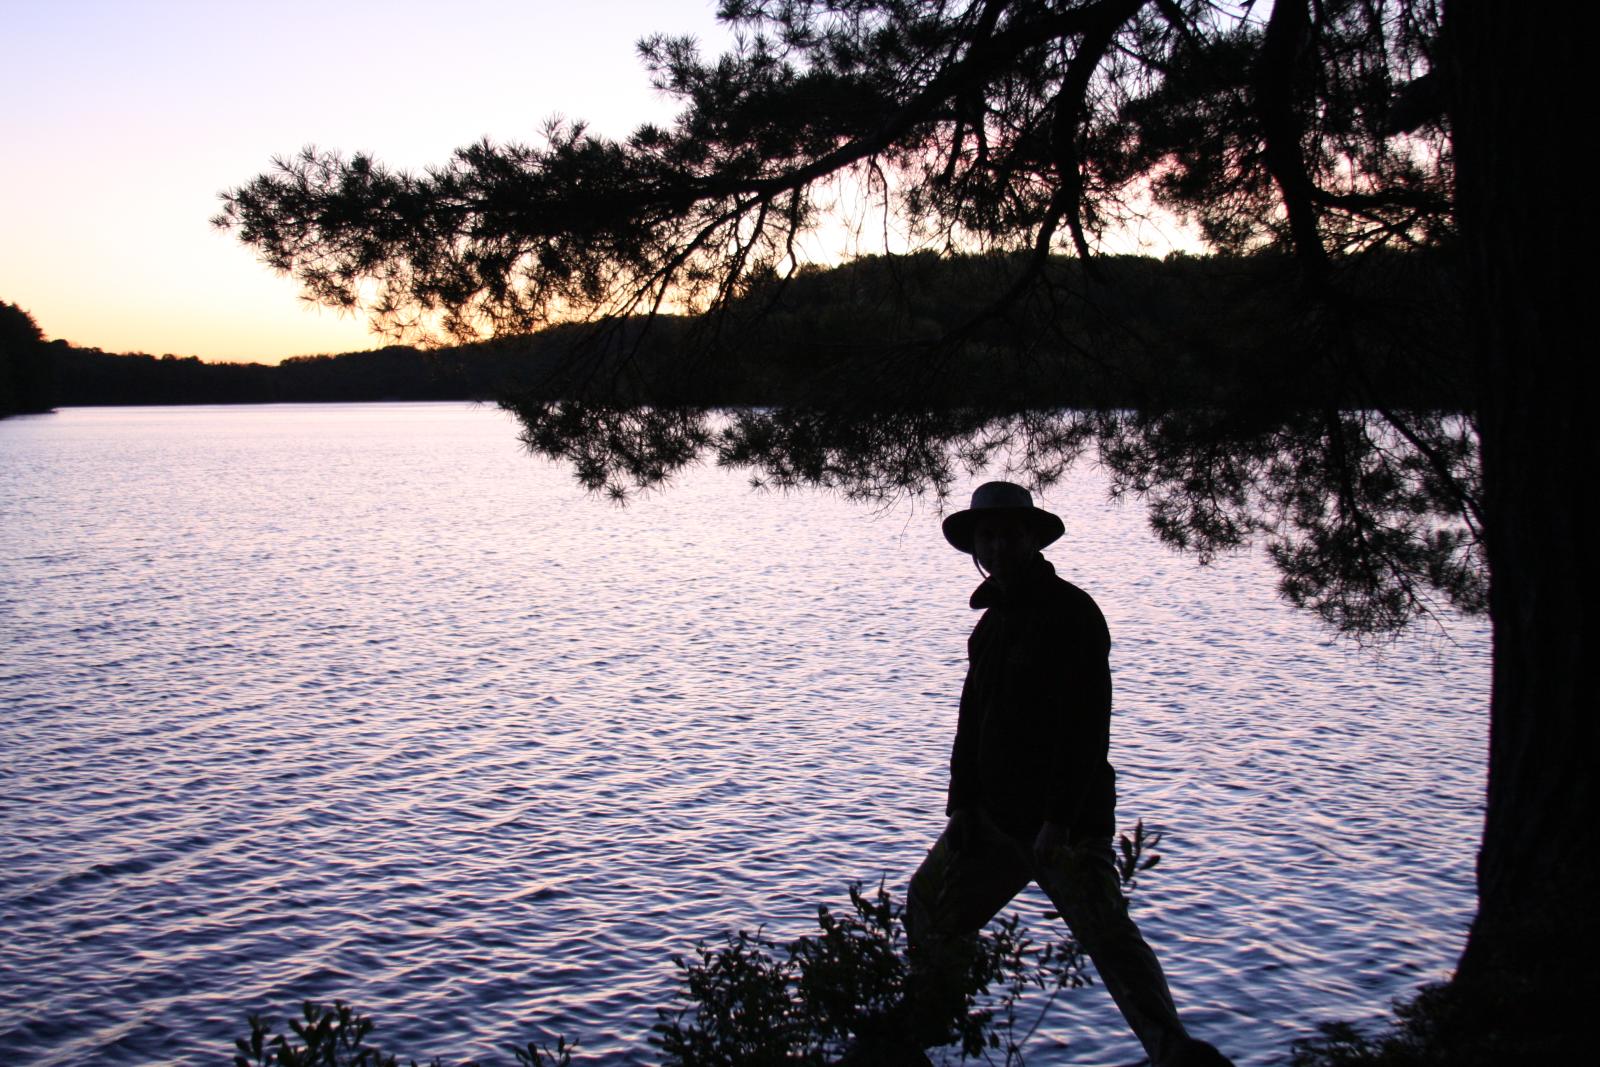 silhouette of man walking next to tree in front of large body of water